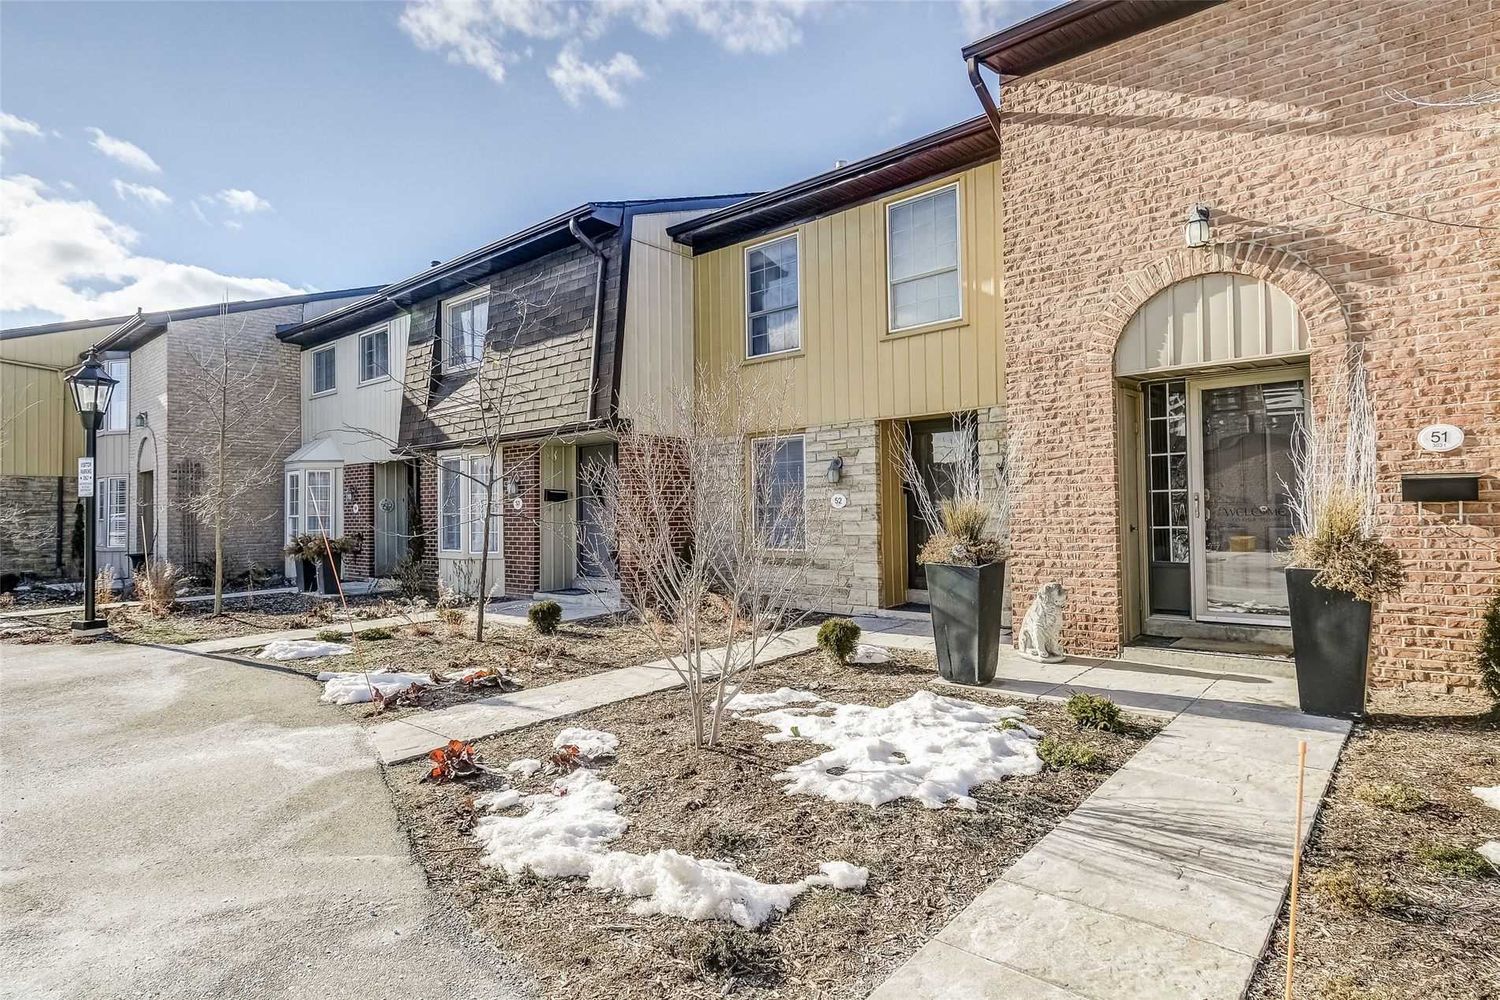 565-567 Guelph Line. Central Park Village Townhomes is located in  East York, Toronto - image #2 of 2